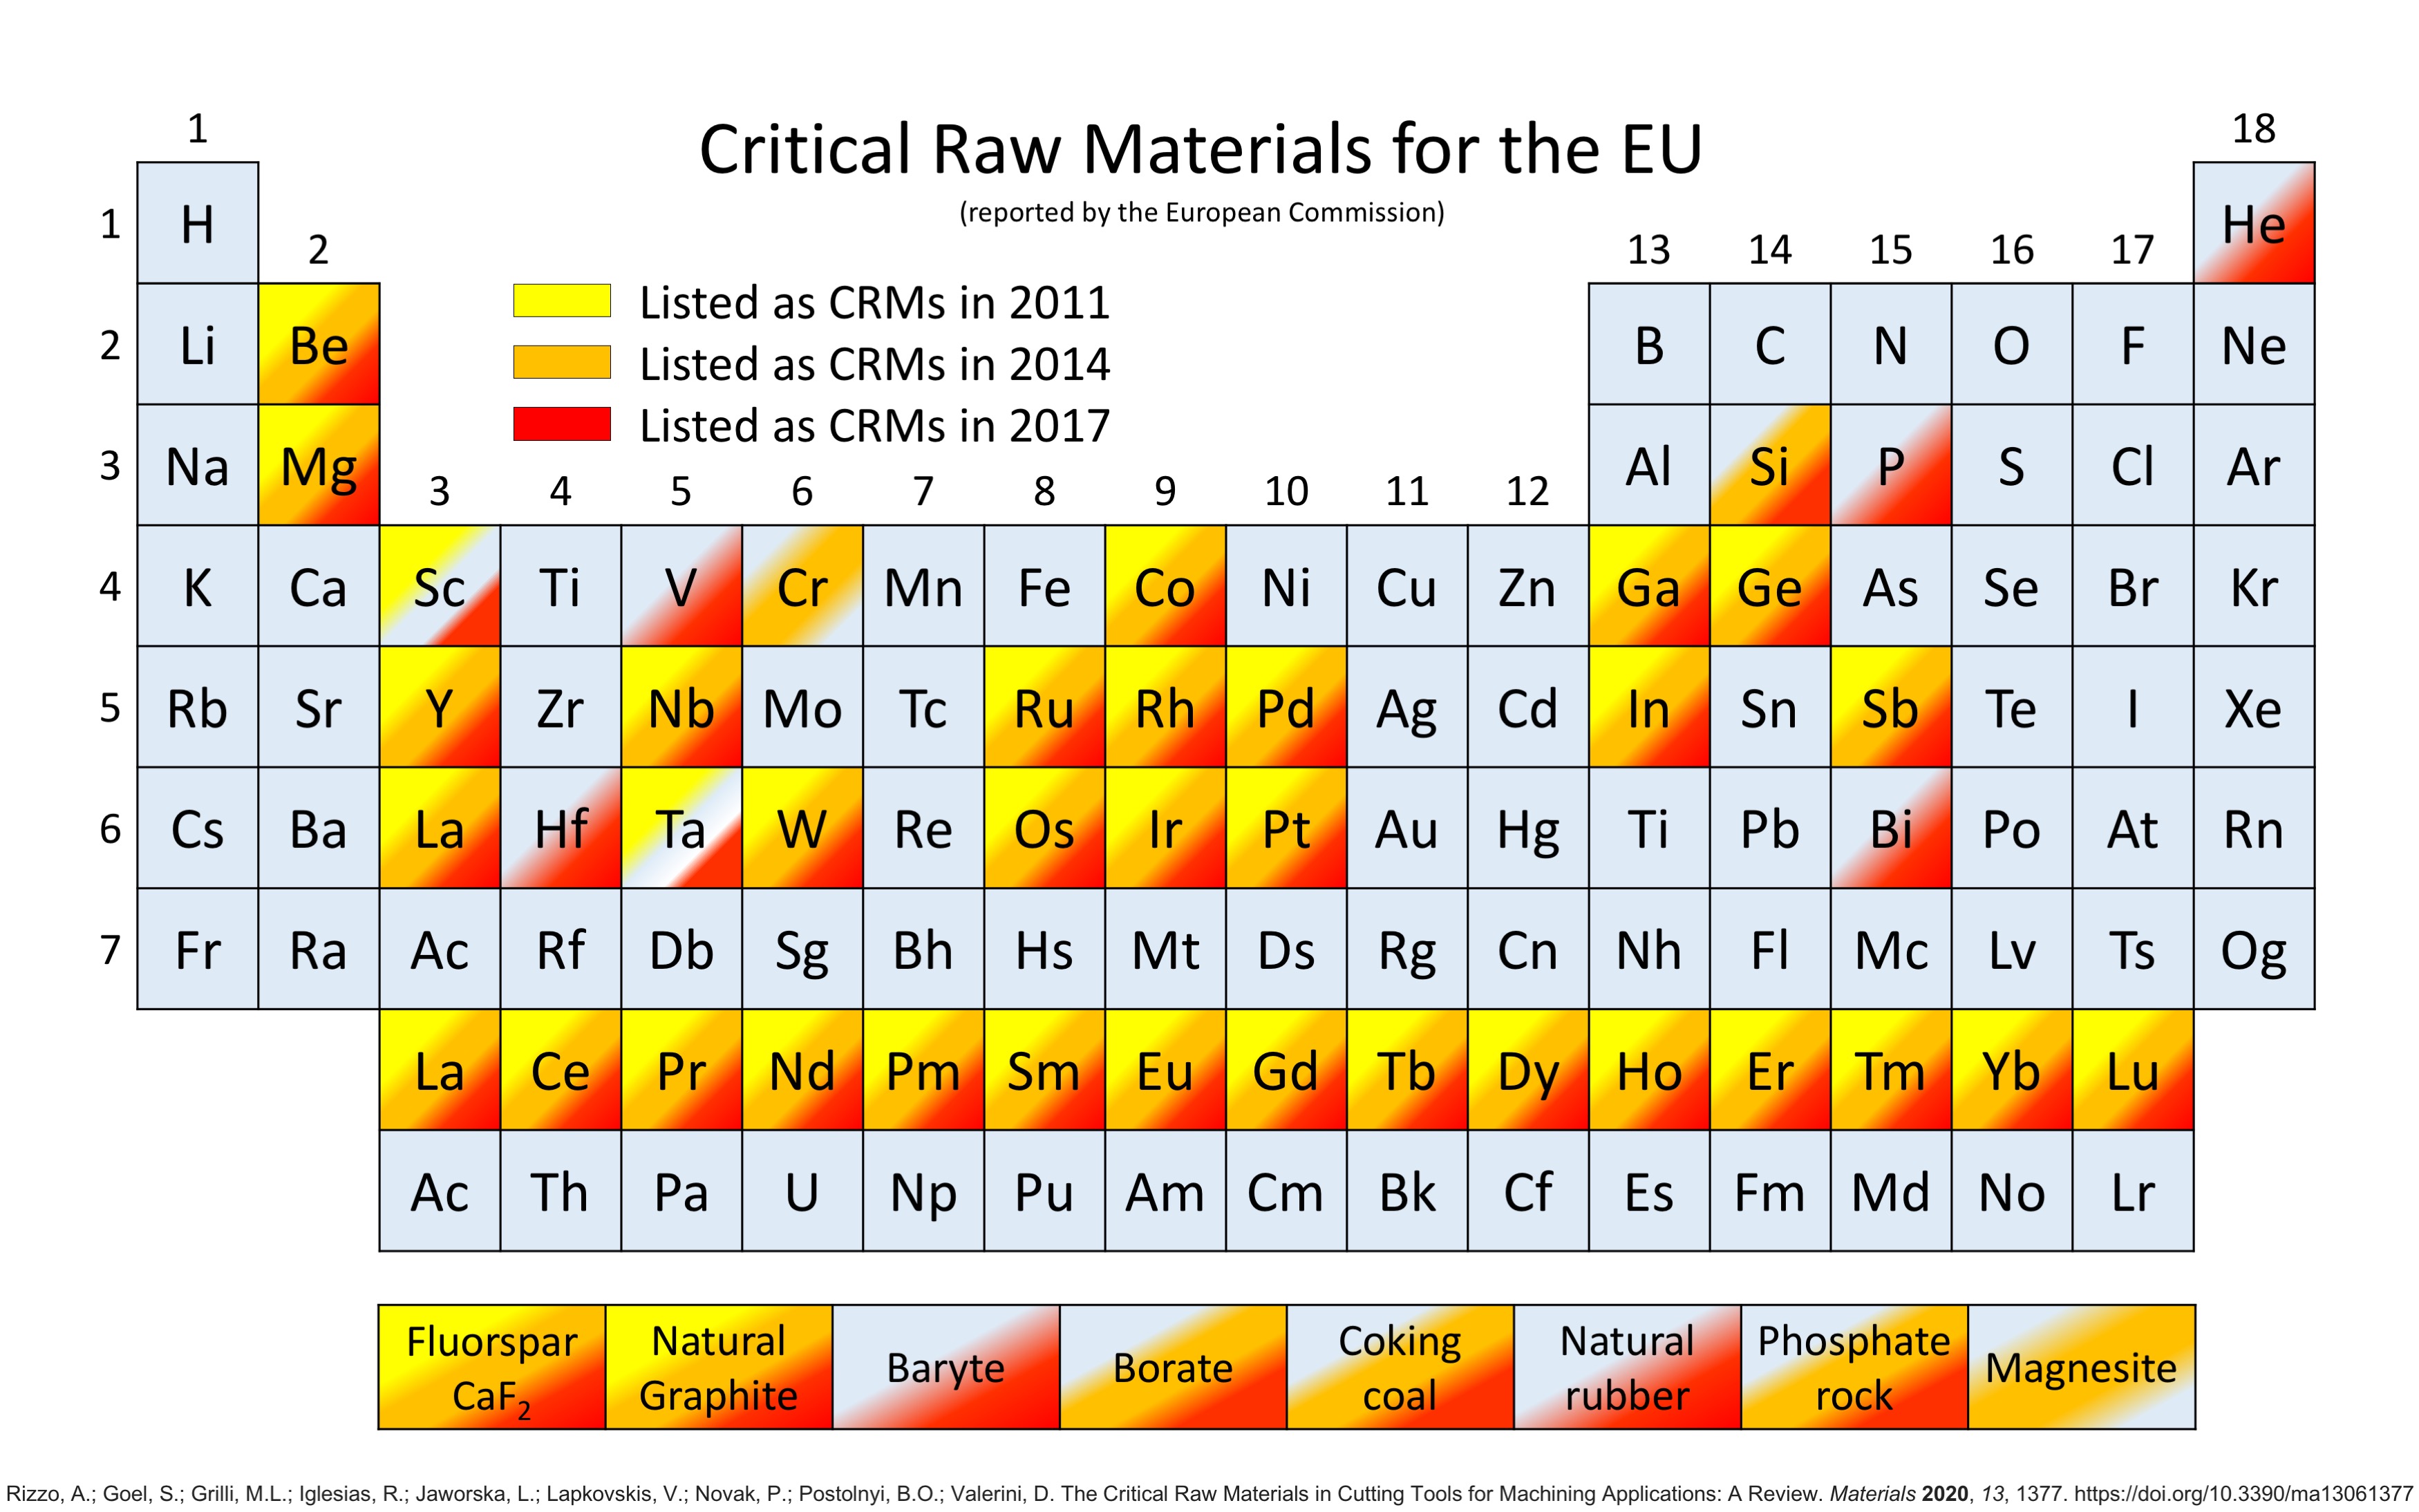 Figure gives a summary of critical raw materials lists reported by the European Commission in 2011, 2014 and 2017